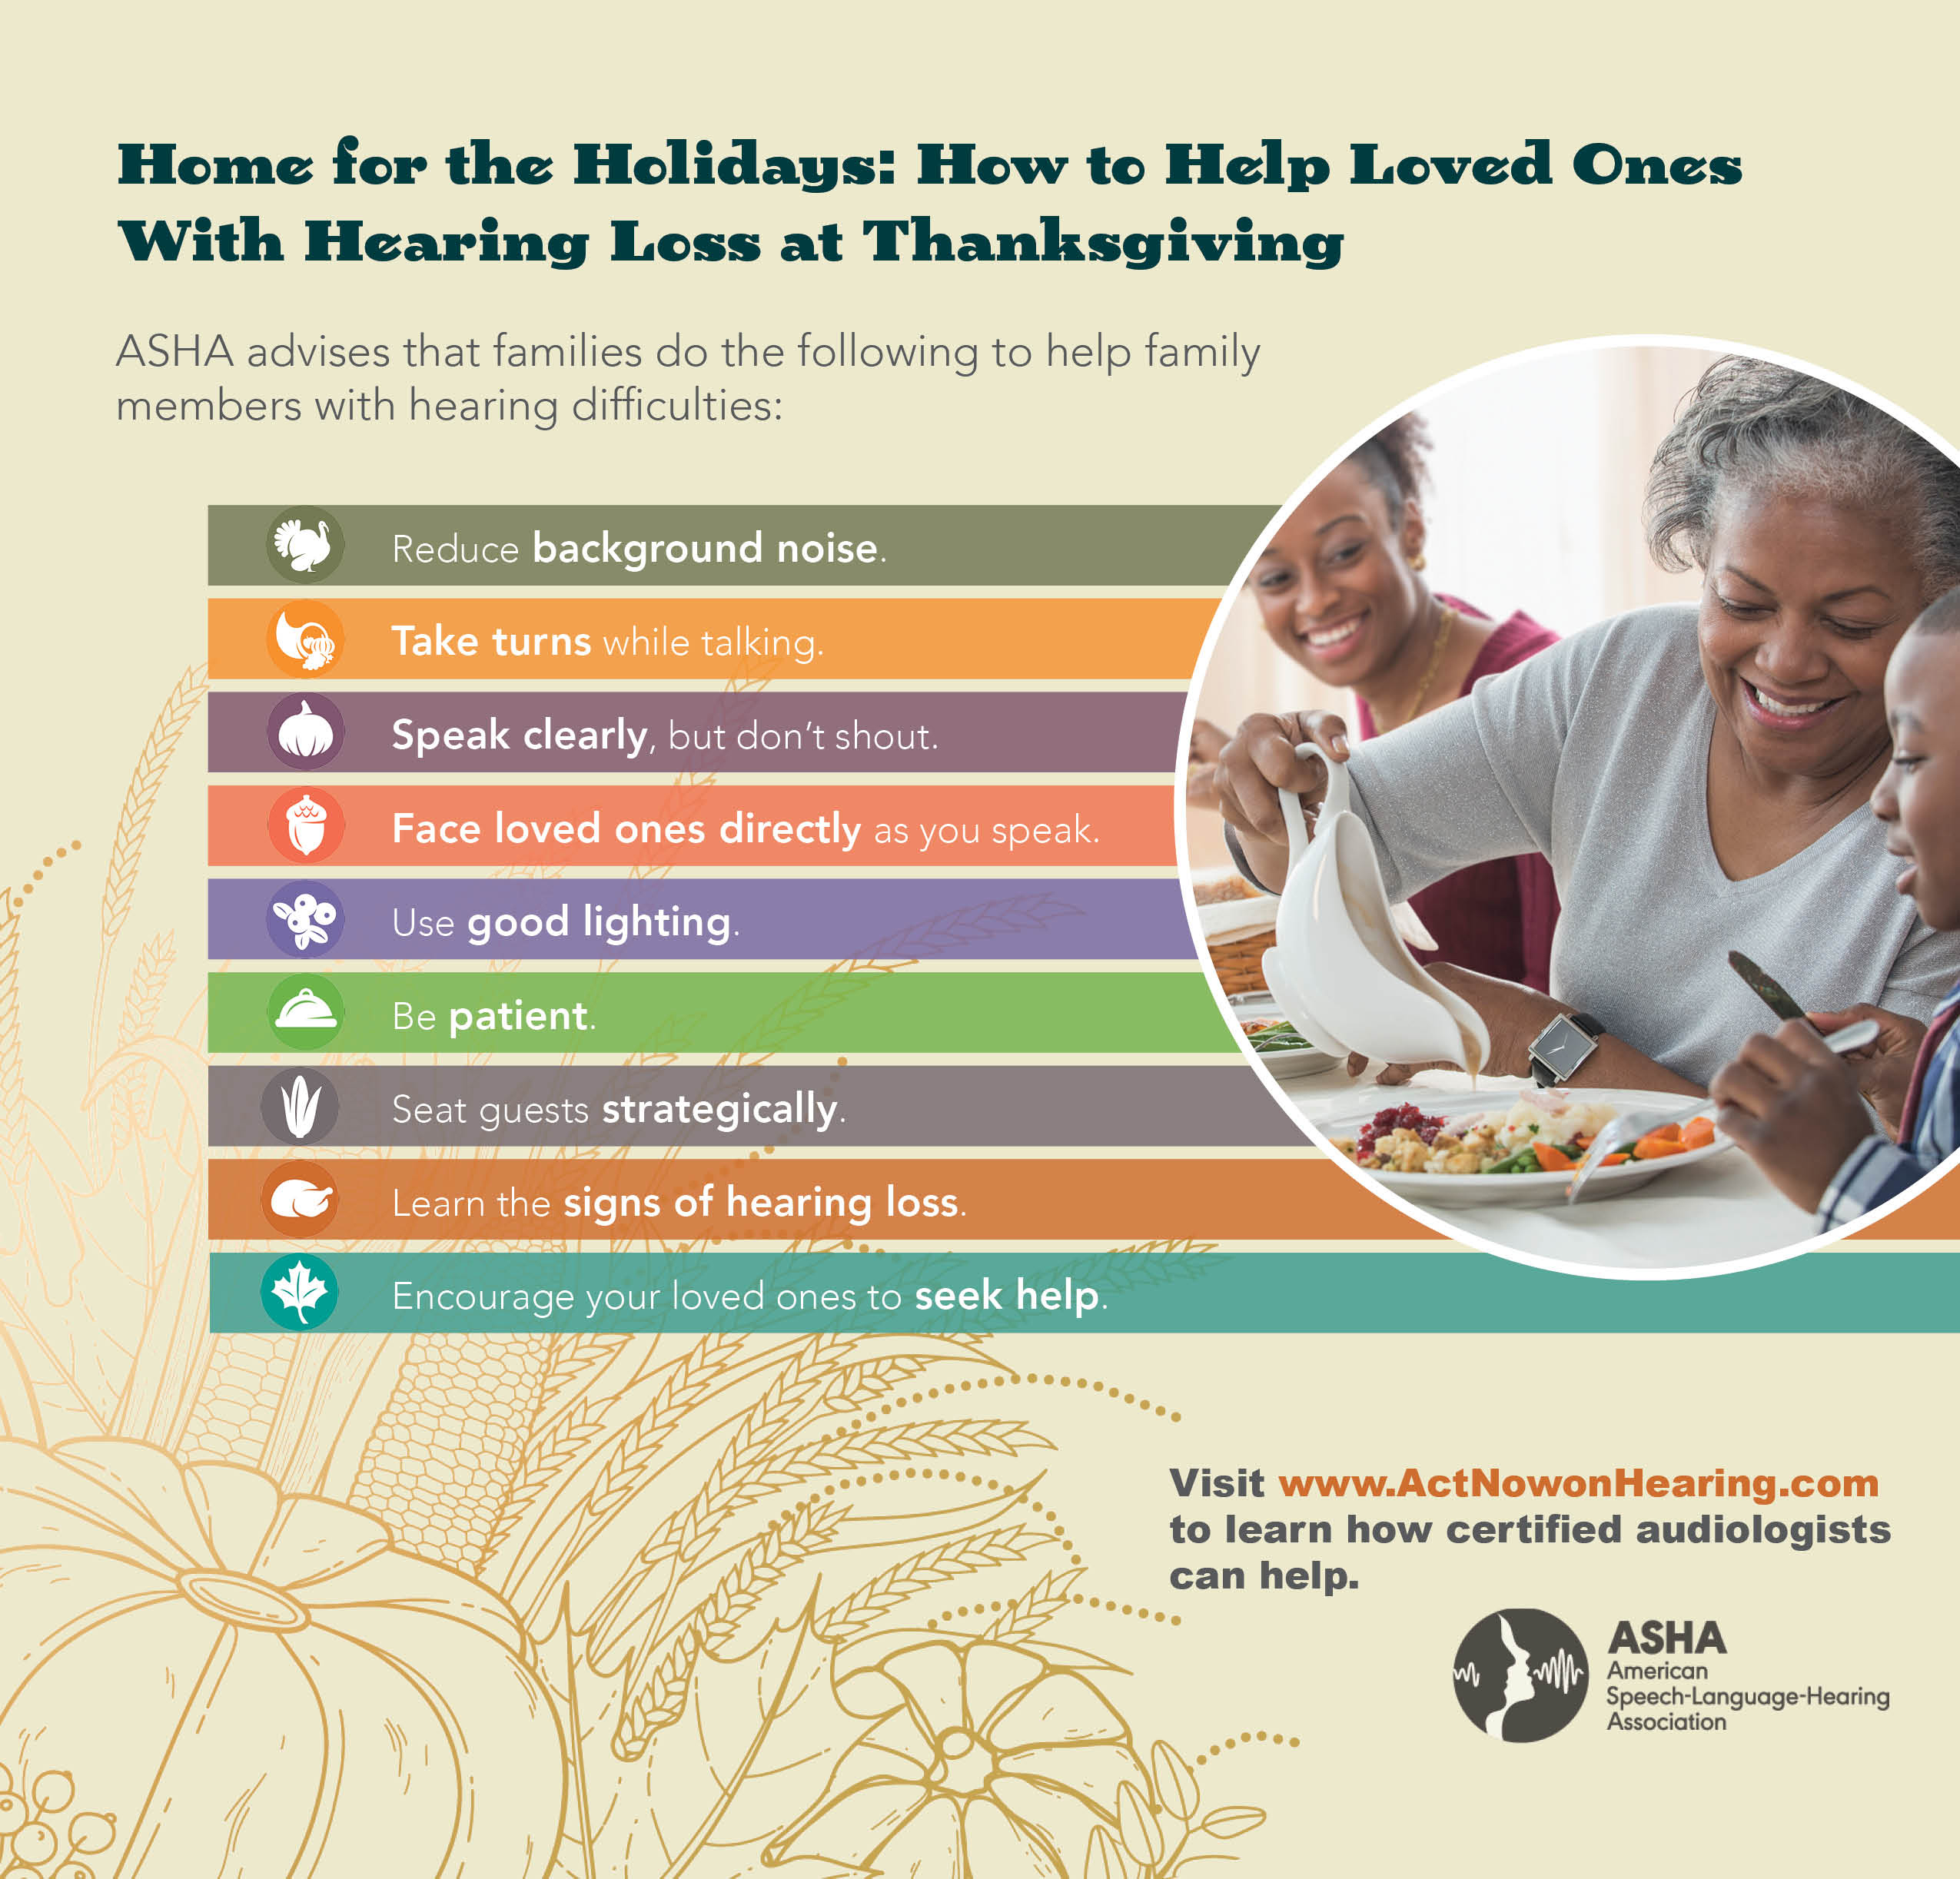 Home for the Holidays: How to Help Loved Ones With Hearing Loss at Thanksgiving